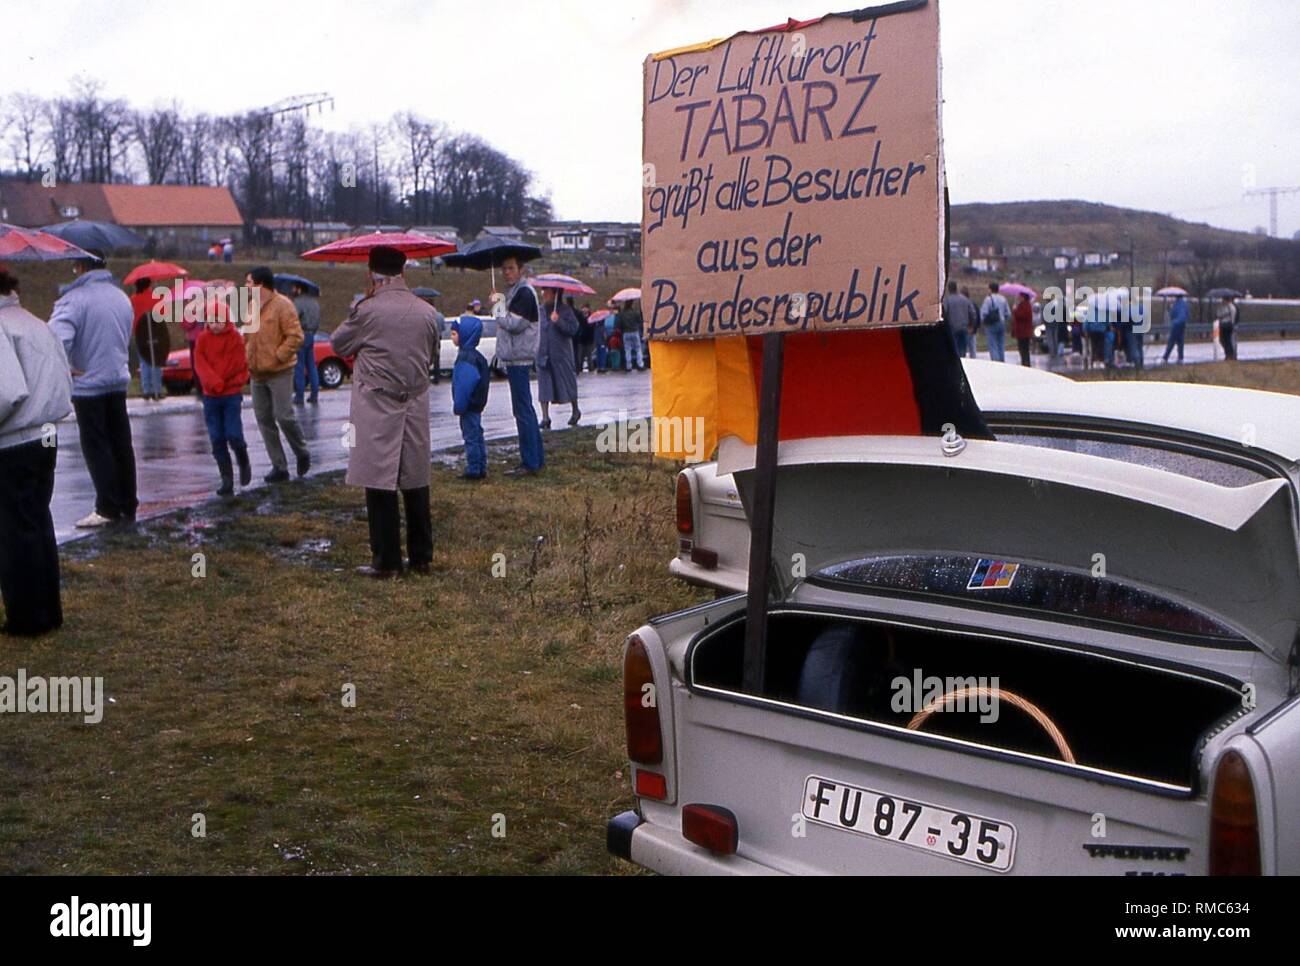 A sign is in the trunk of a Trabant on the roadside in Tabarz, which says 'The climatic health-resort Tabarz greets visitors from the Federal Republic'. In the background are people with umbrellas. Stock Photo